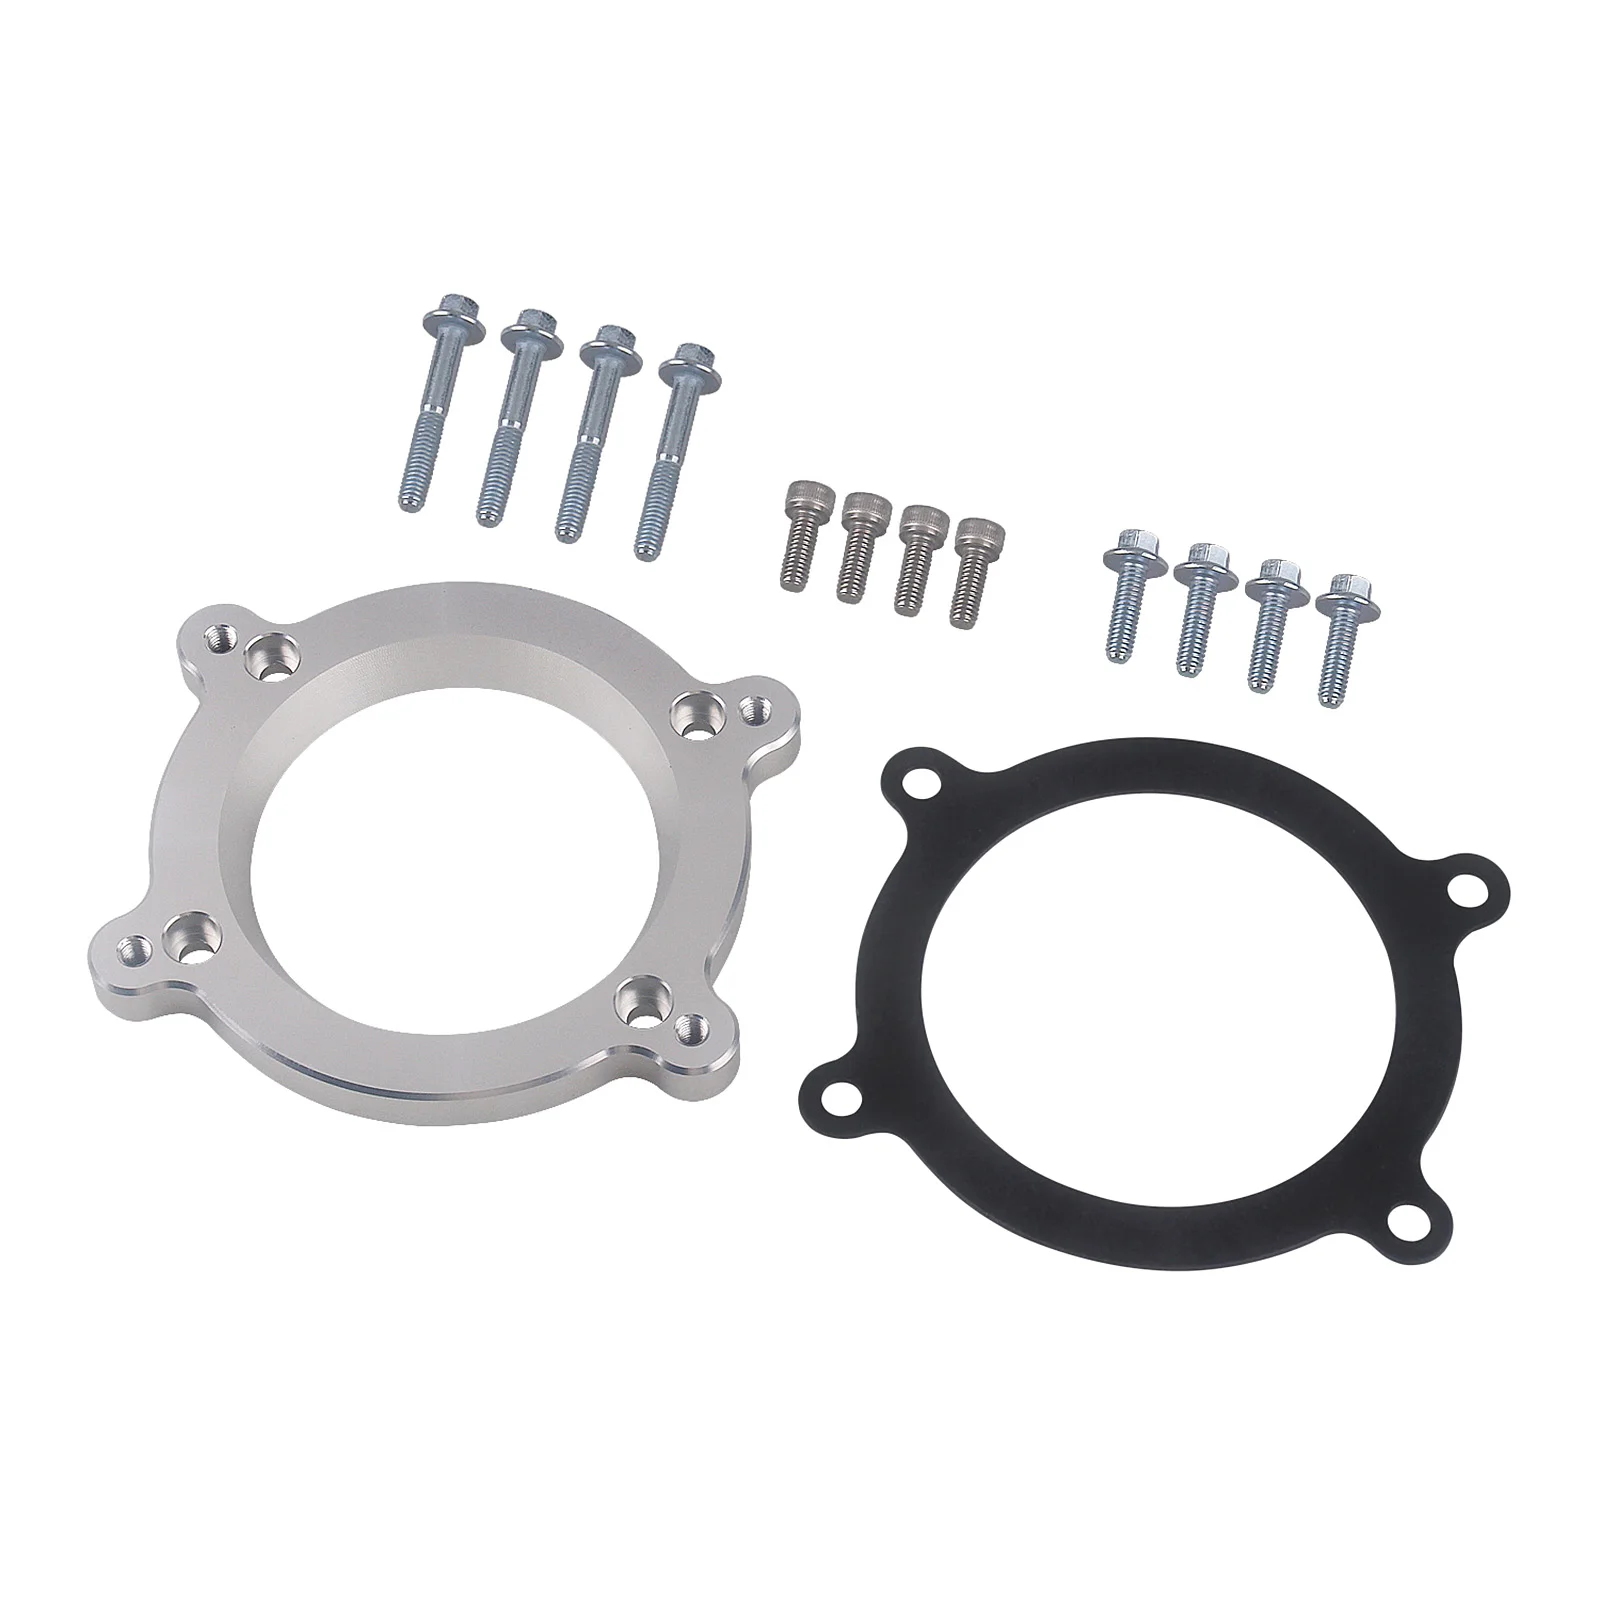 New LS4 ONLY Intake  to LS Throttle Body Adapter Plate Replacements  GXP 551572,   and DBC throttle bodies